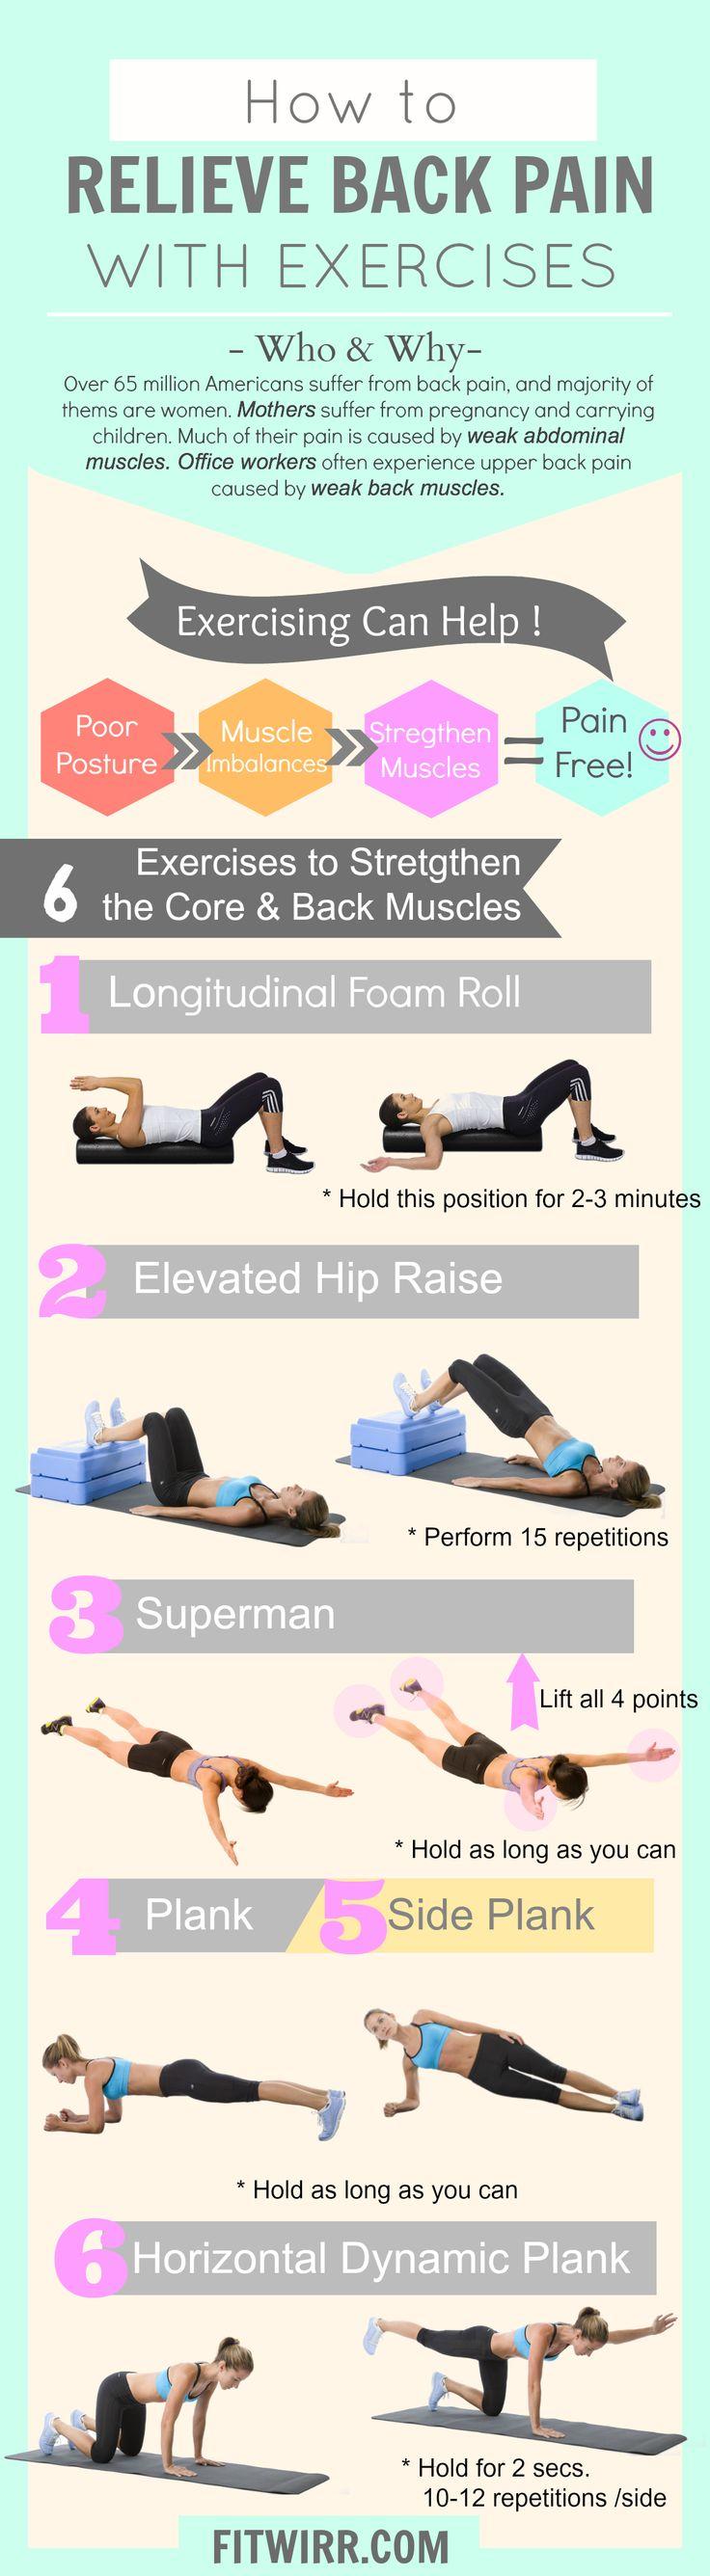 Hochzeit - A List Of 6 Best Low Back Pain Exercises For Fast Relief